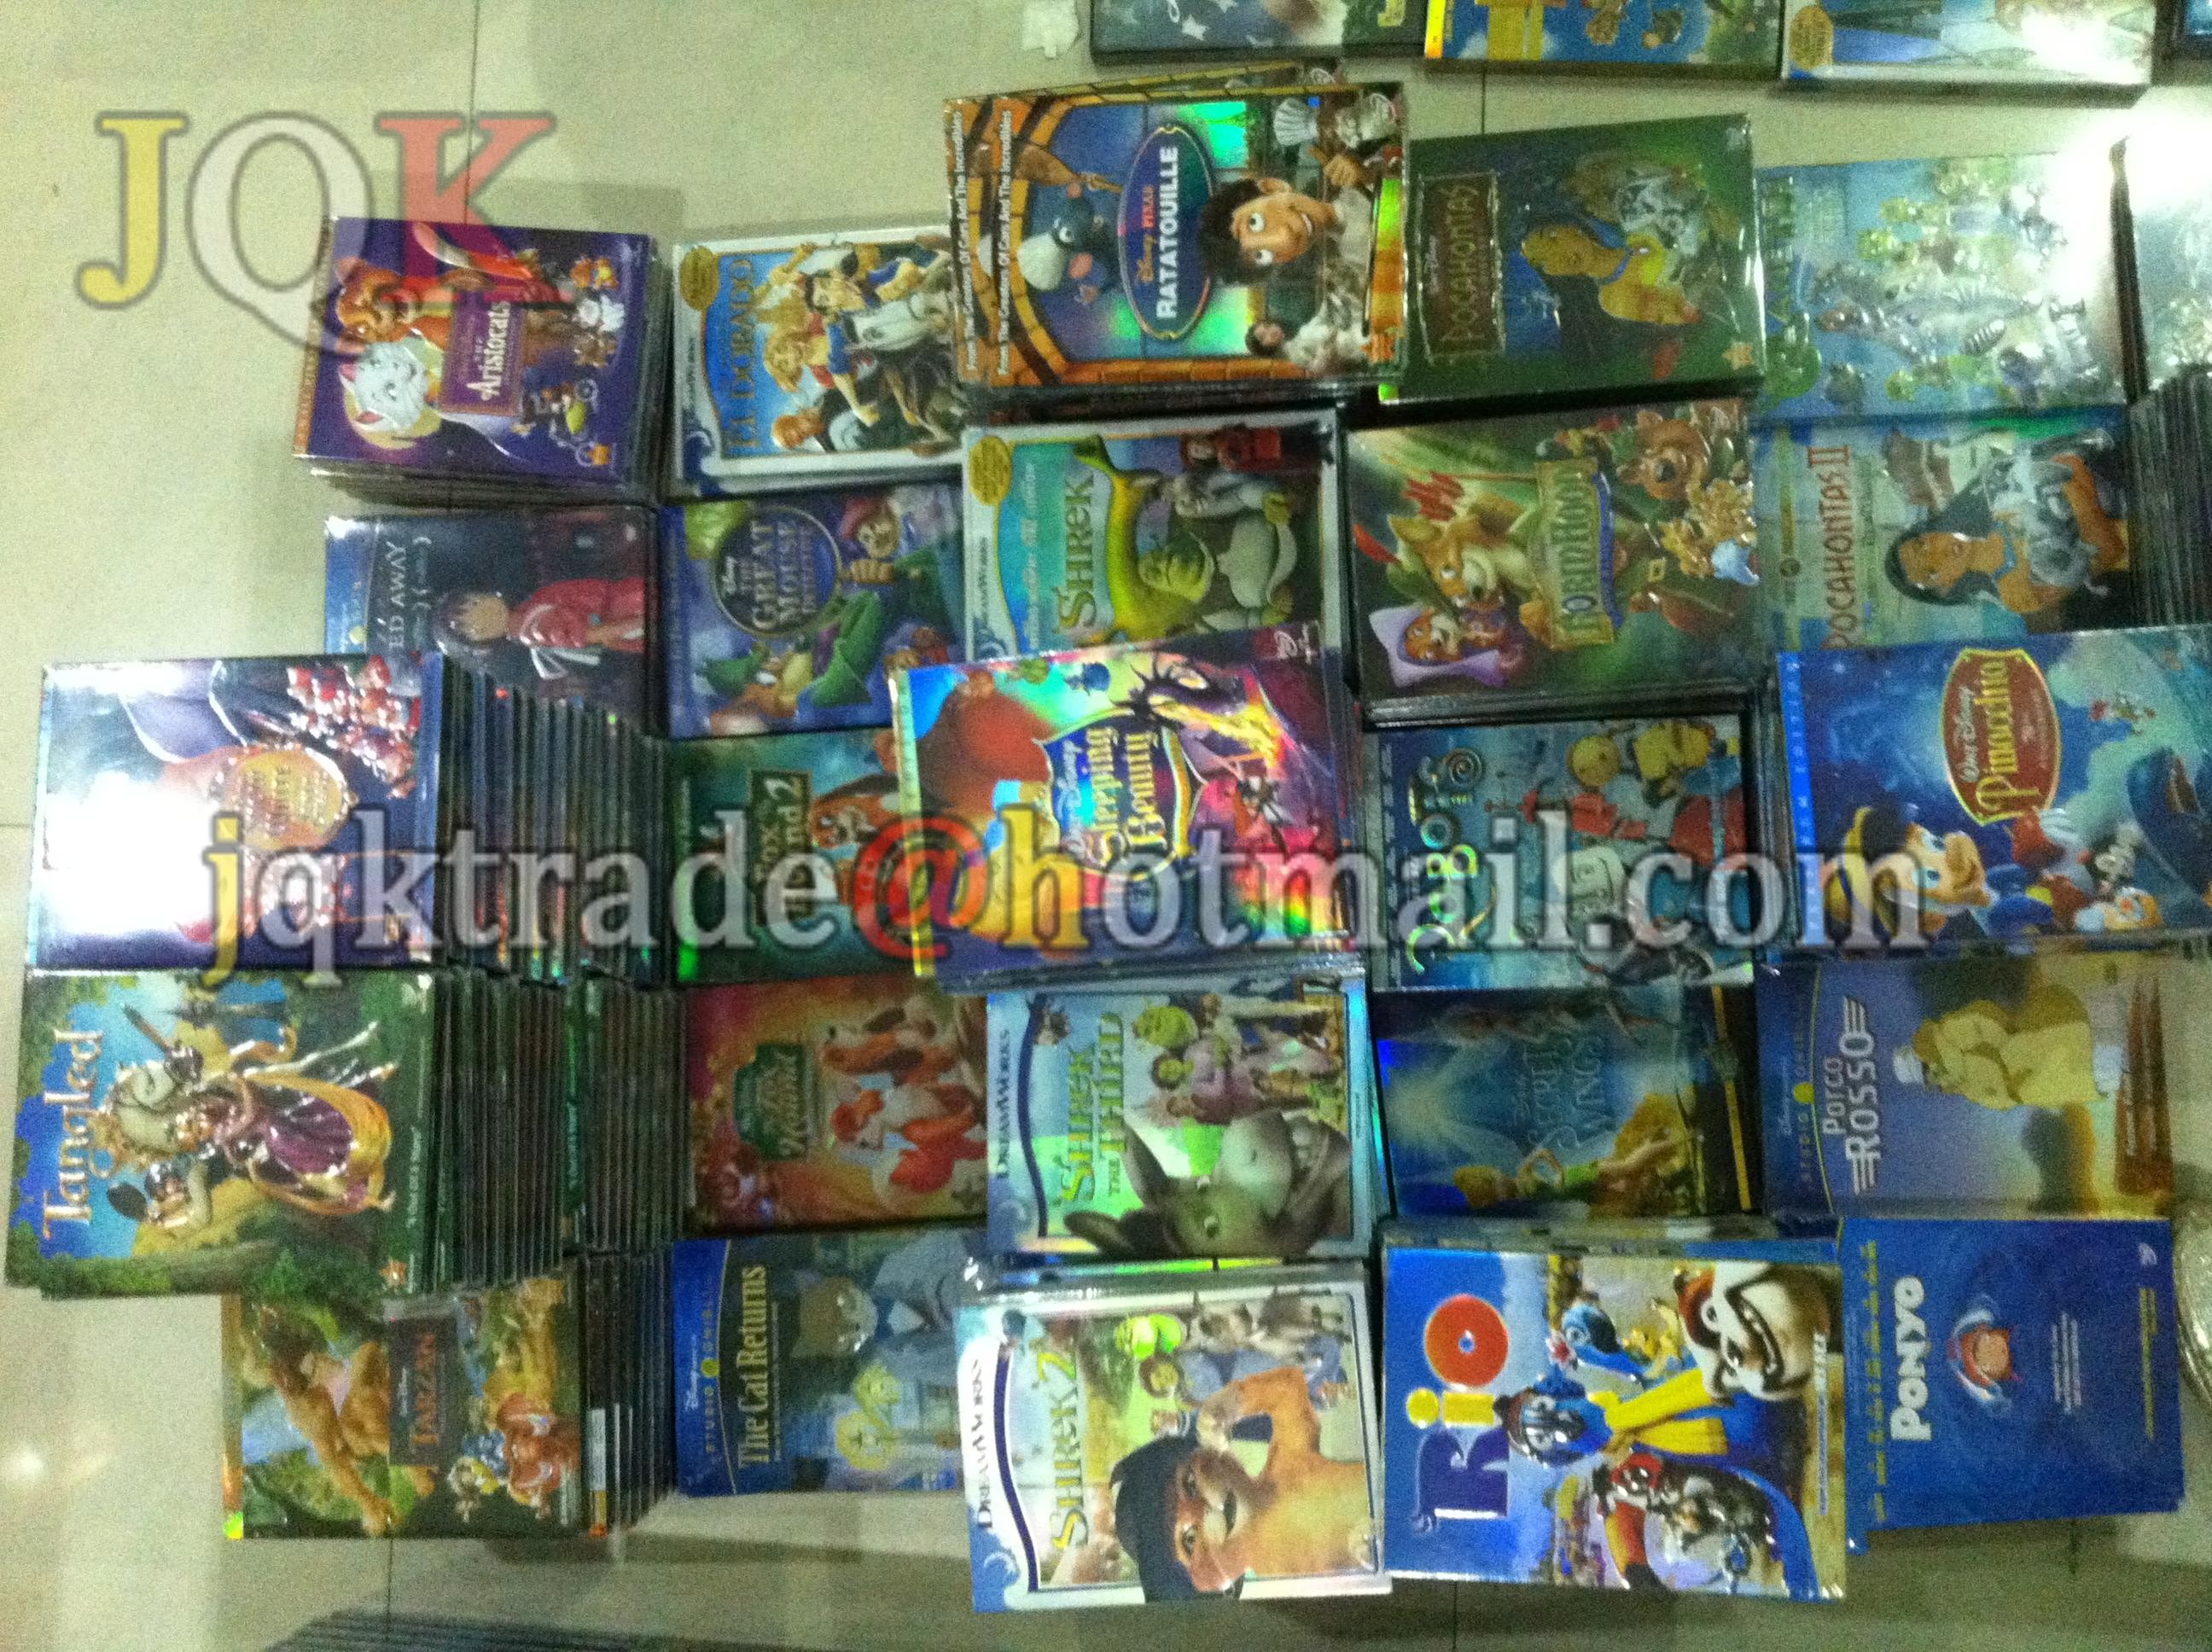 China disney movies club,new movies on dvd,the lion King, new on dvd, dvd,bambi,dvd player,movie on sale